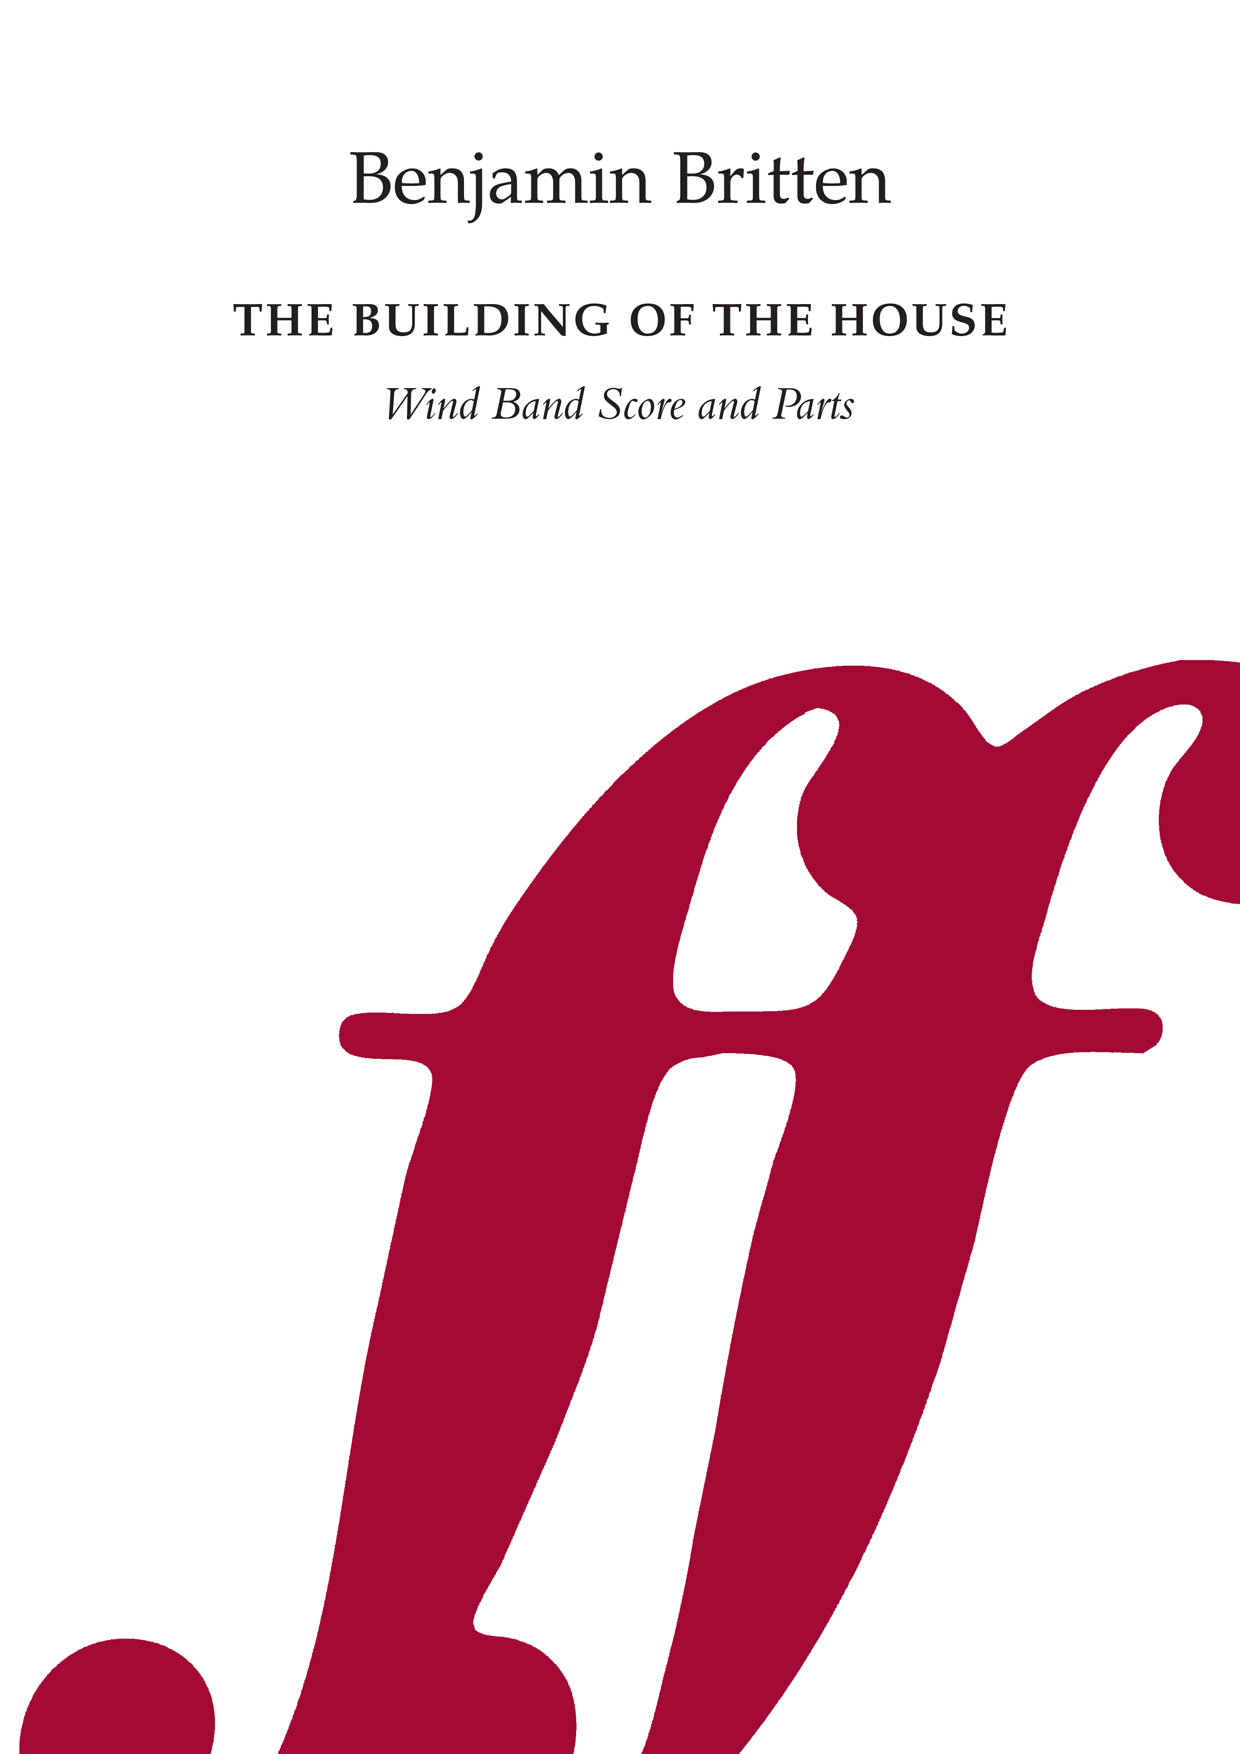 Benjamin Britten: Building of the House. Wind band: Concert Band